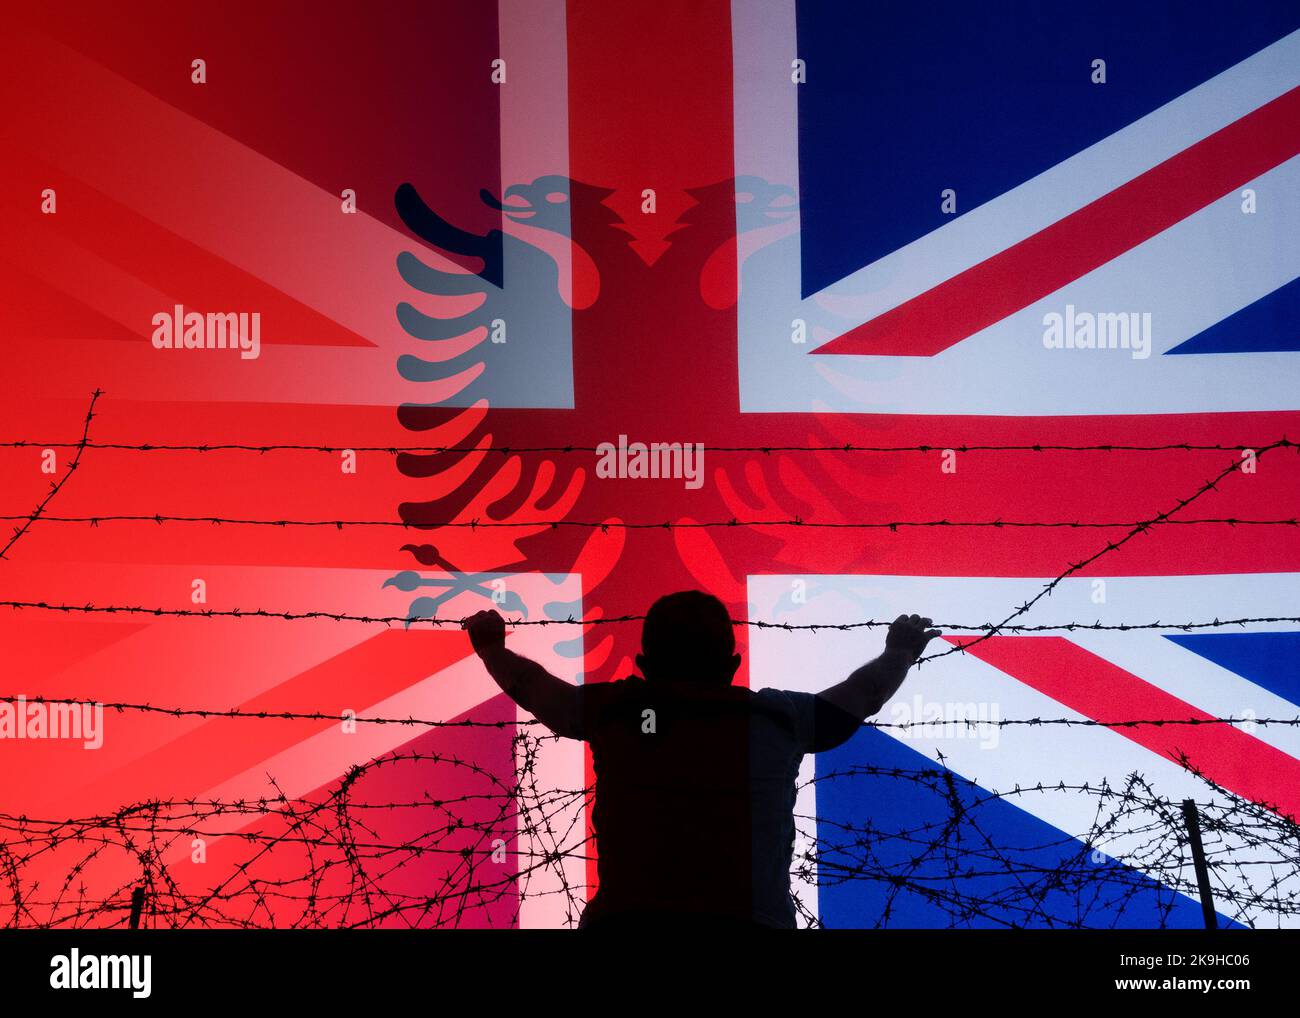 Flags of Albania and UK, United Kingdom, with man looking over barbed wire border fence. Concept image: immigration, Channel crossing, Albanian... Stock Photo